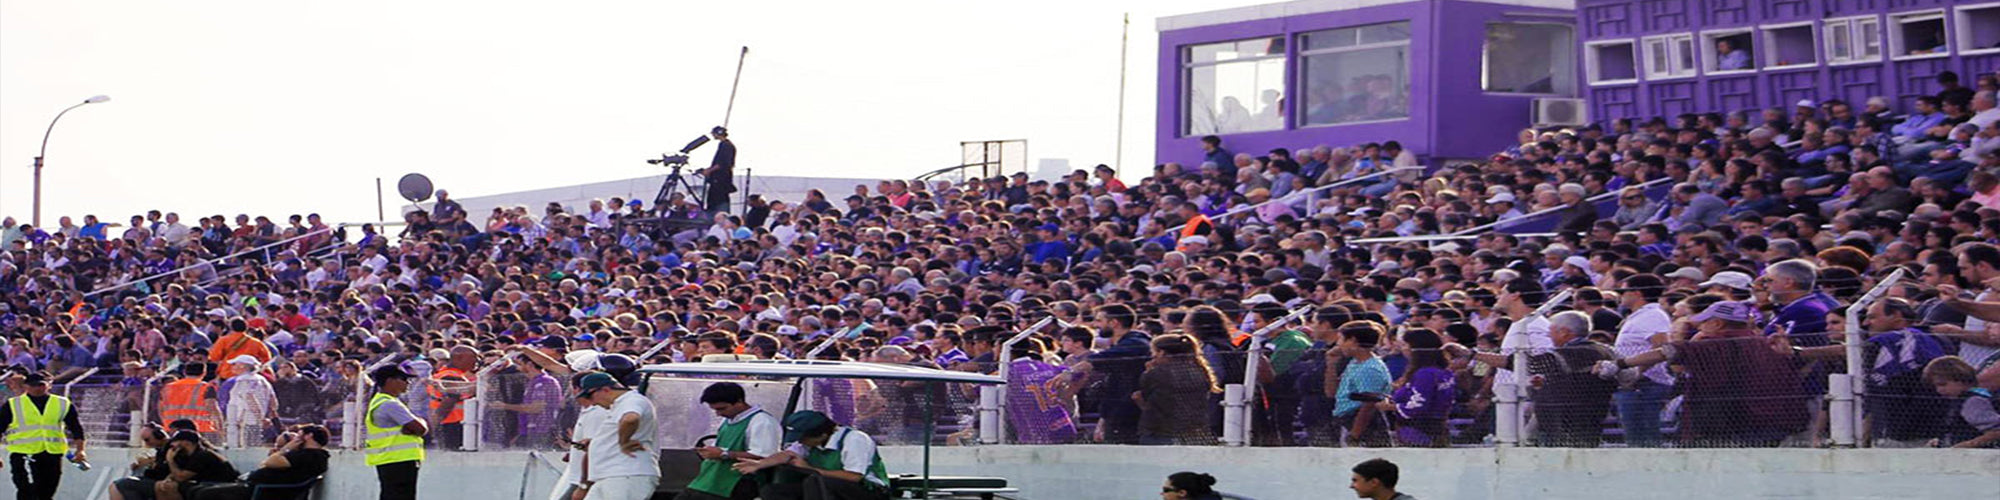 Defensor Sporting Tickets & Experiences